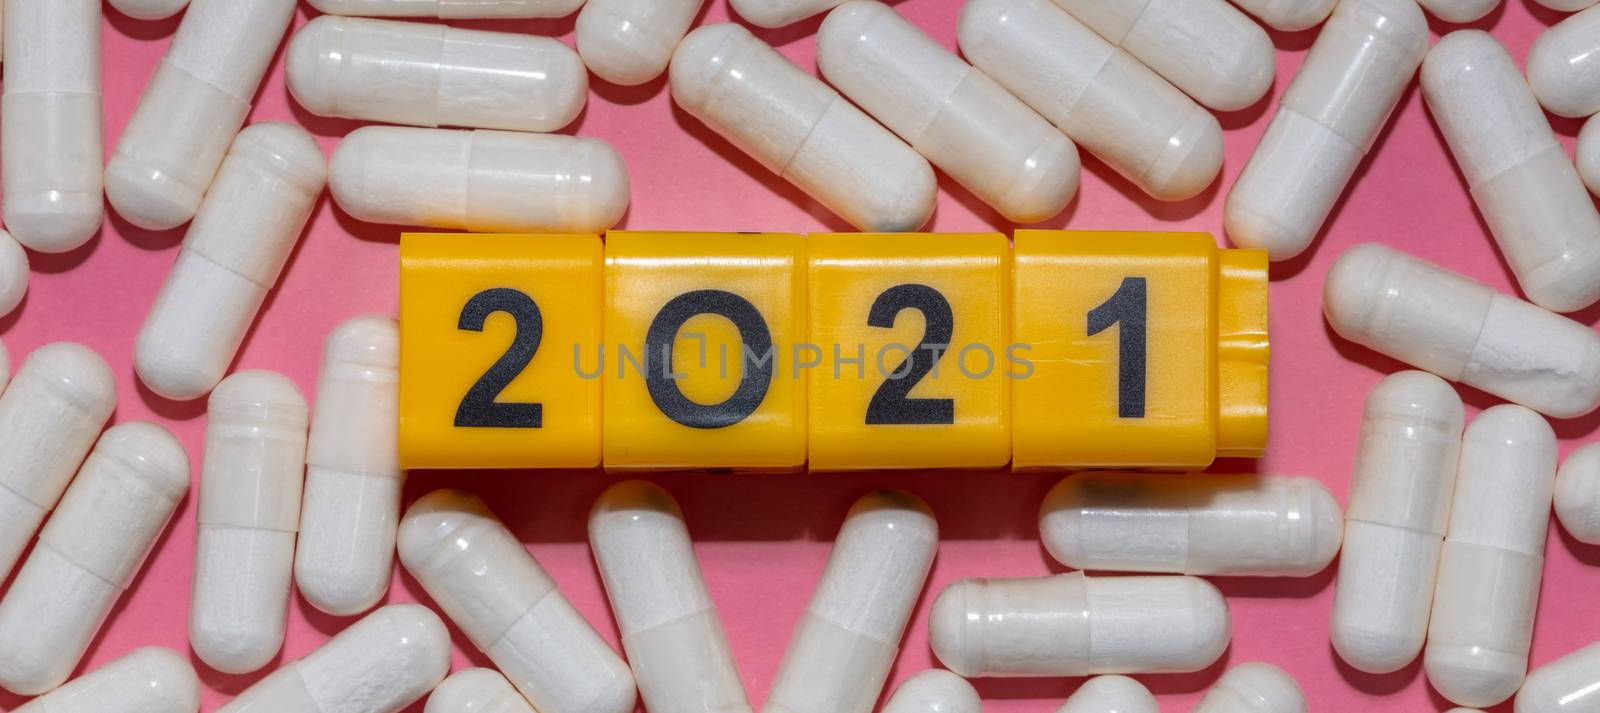 Top close up shot of white pills surrounding yellow cubes with black digits which form 2021 year. Pink background. Healthcare and pharmaceutical concept. New normal and reality concept. Banner size. by DamantisZ